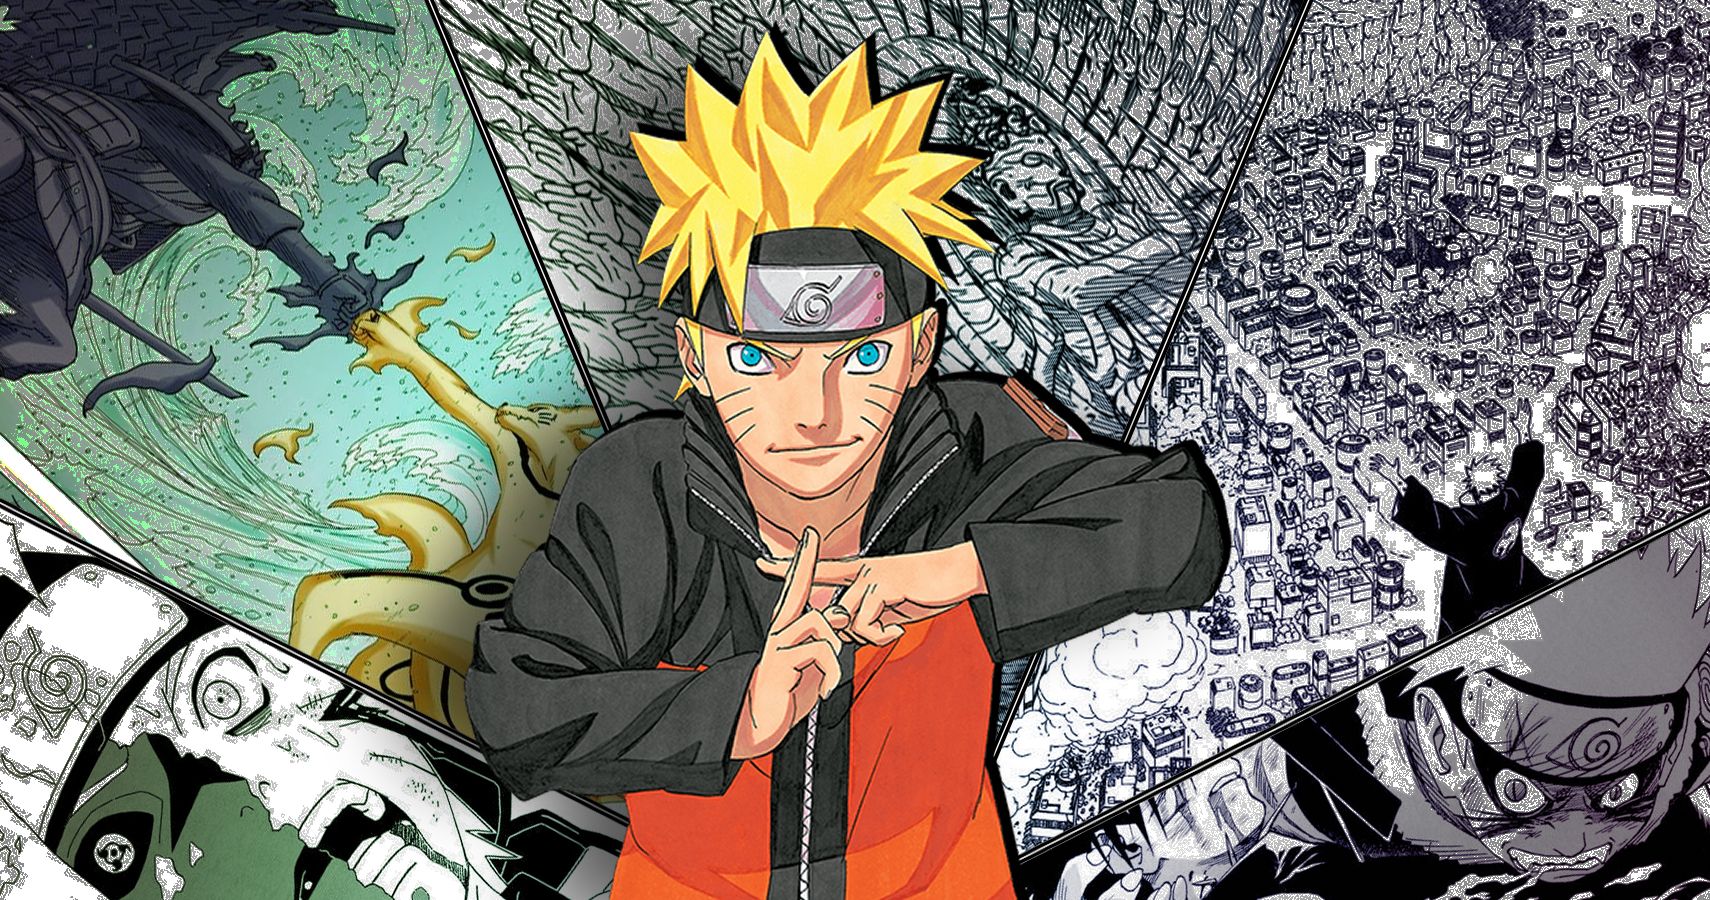 10 Hidden Details You Never Noticed About Naruto’s Art Style